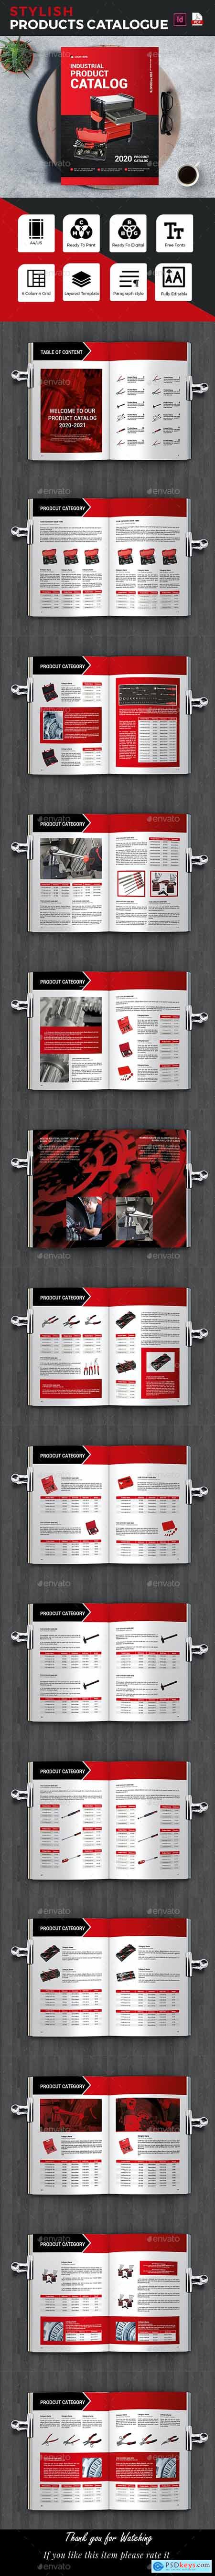 Industrial Products Catalog Template 28142676